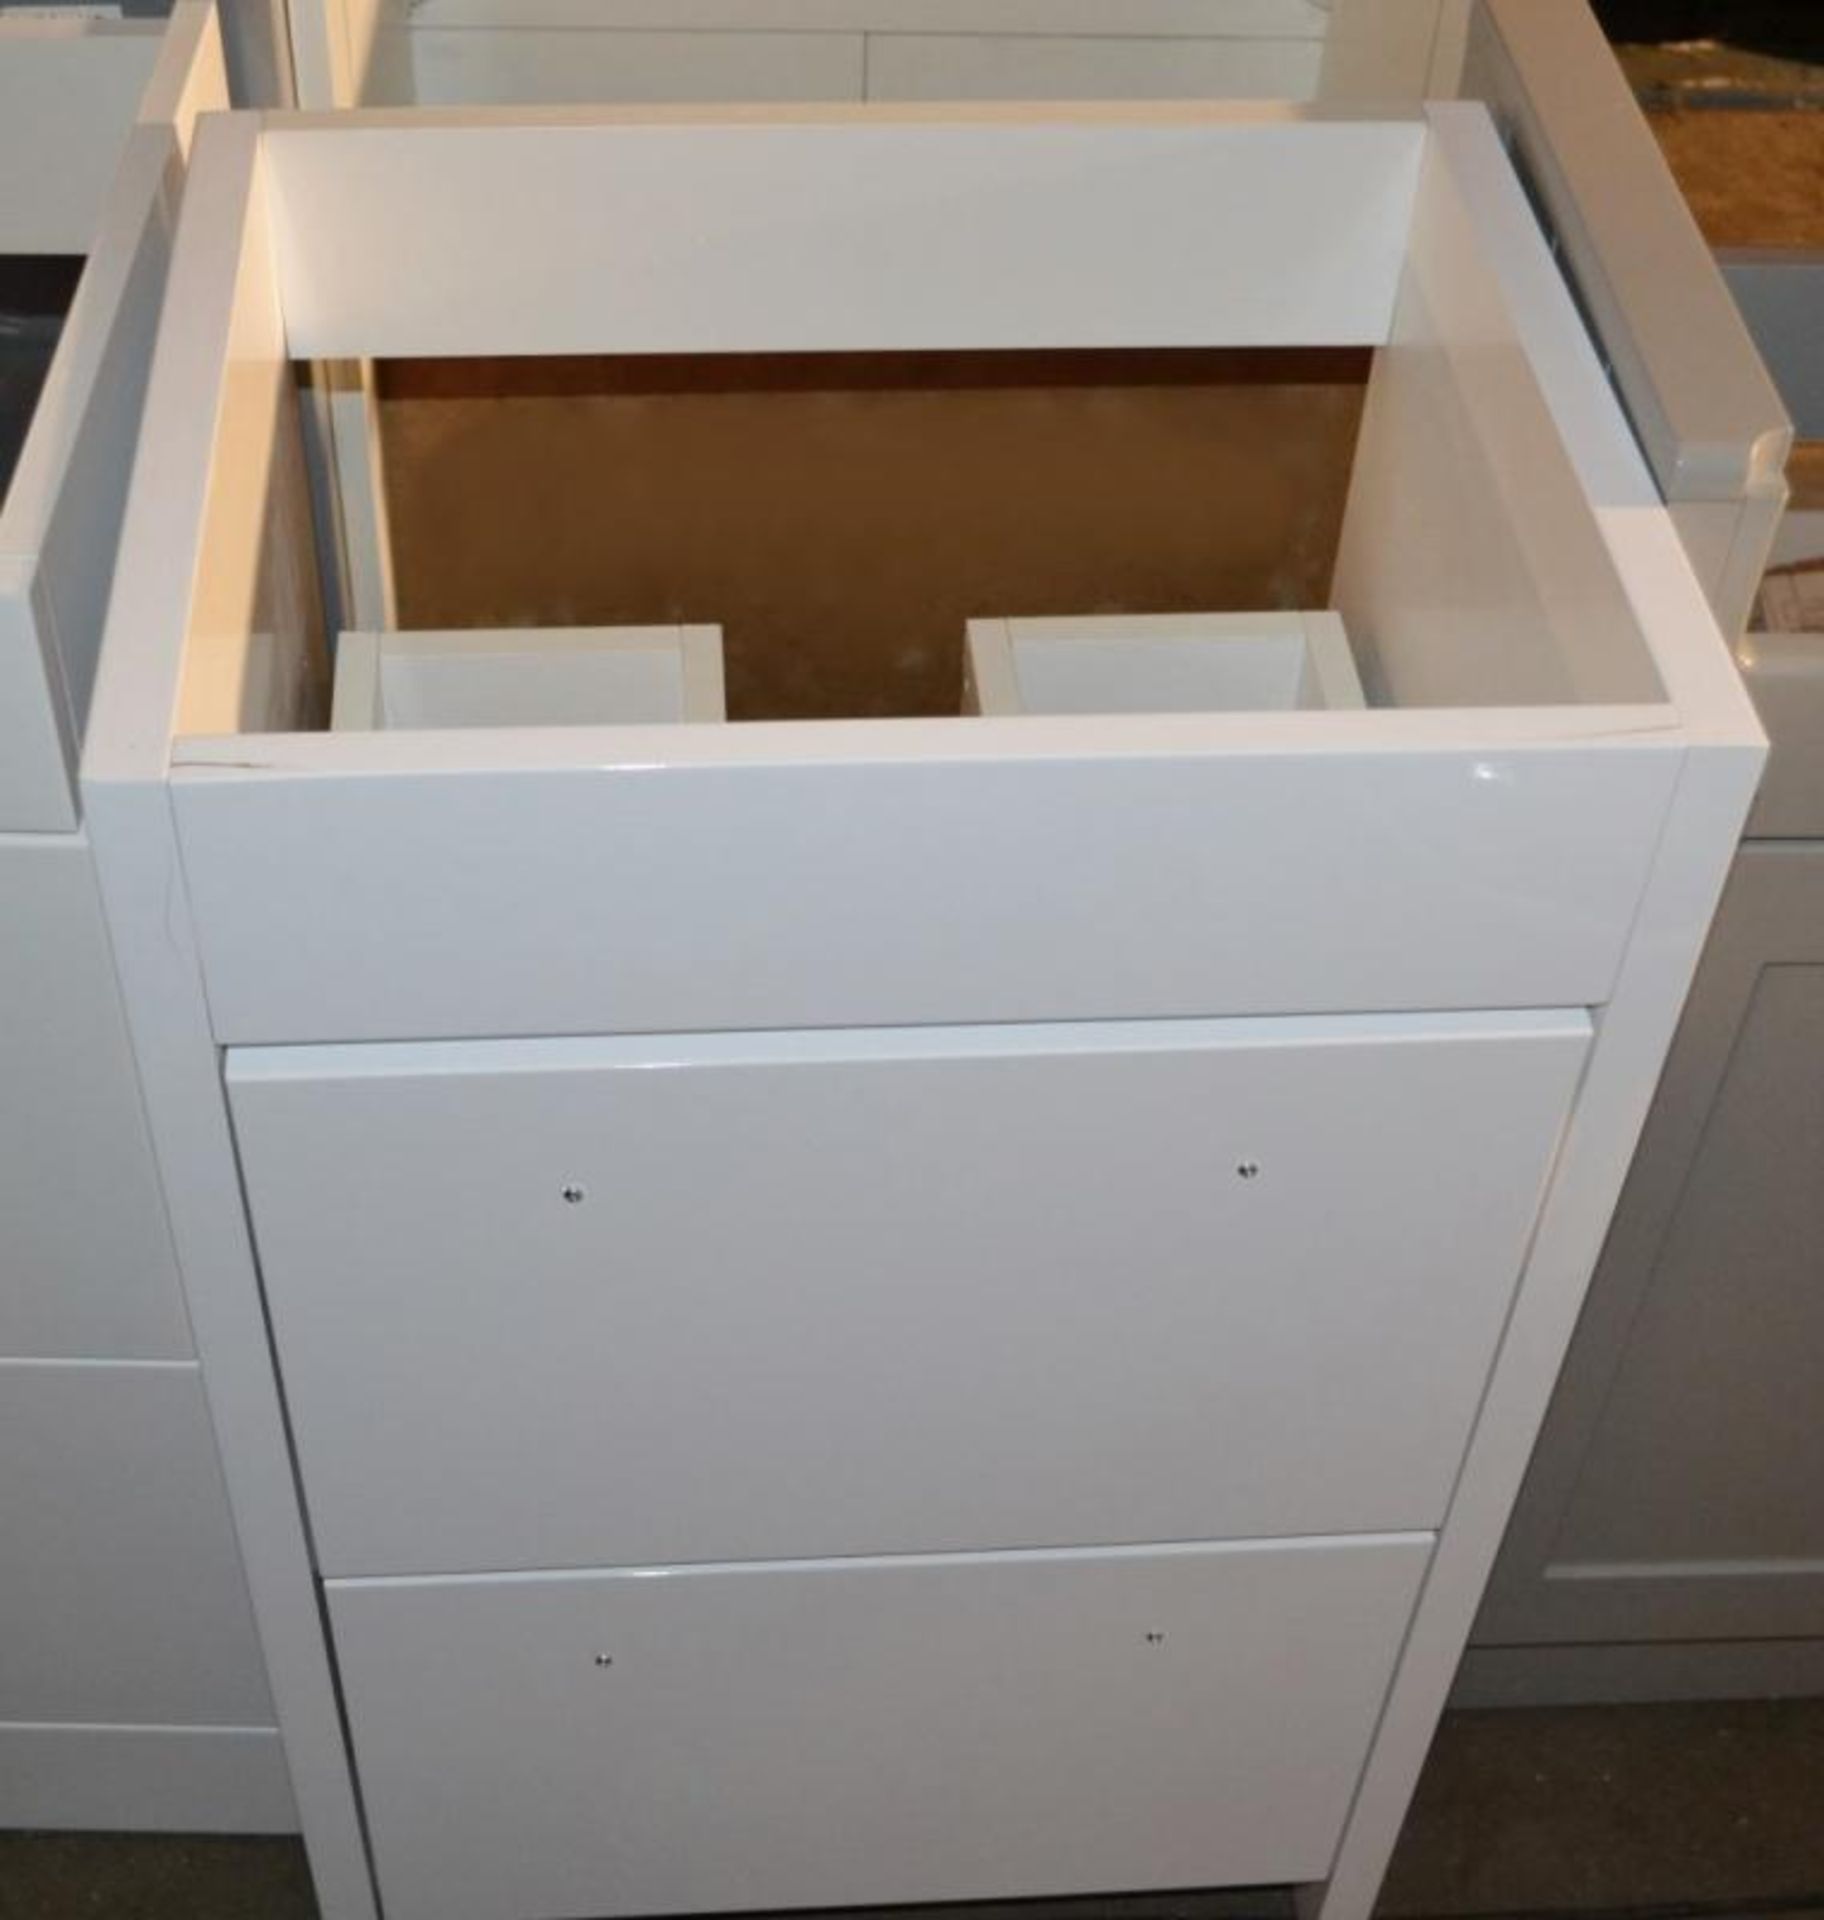 1 x Freestanding 2-Drawer Vanity Basin Unit In A Gloss White Finish - New / Unused Stock - Dimension - Image 3 of 6